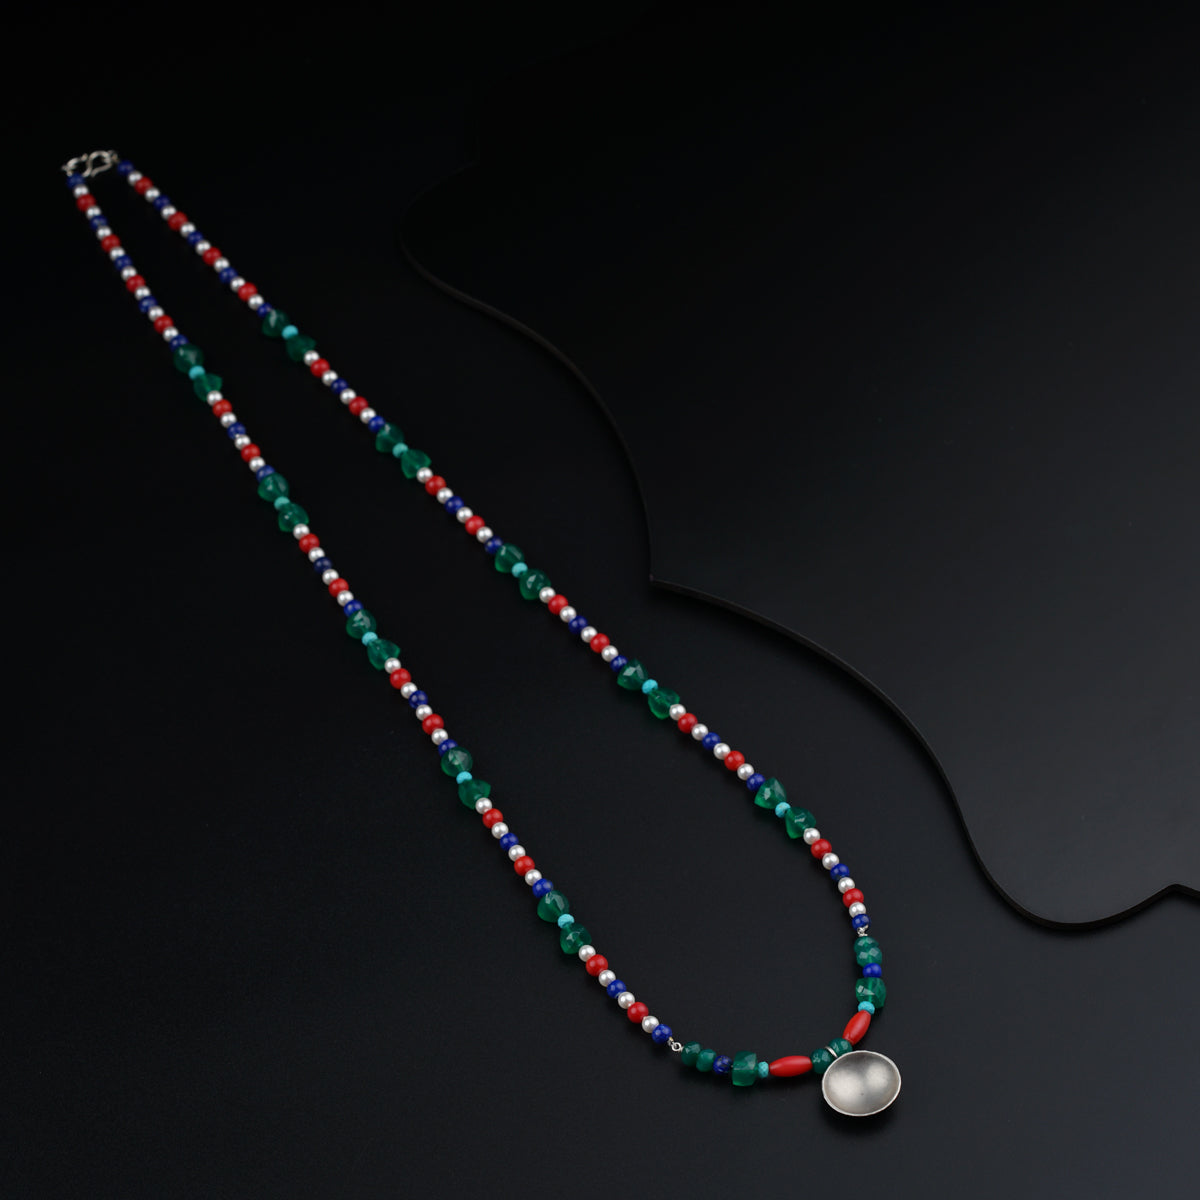 Long Necklace with Vatee Pendant and Semi Precious Stones